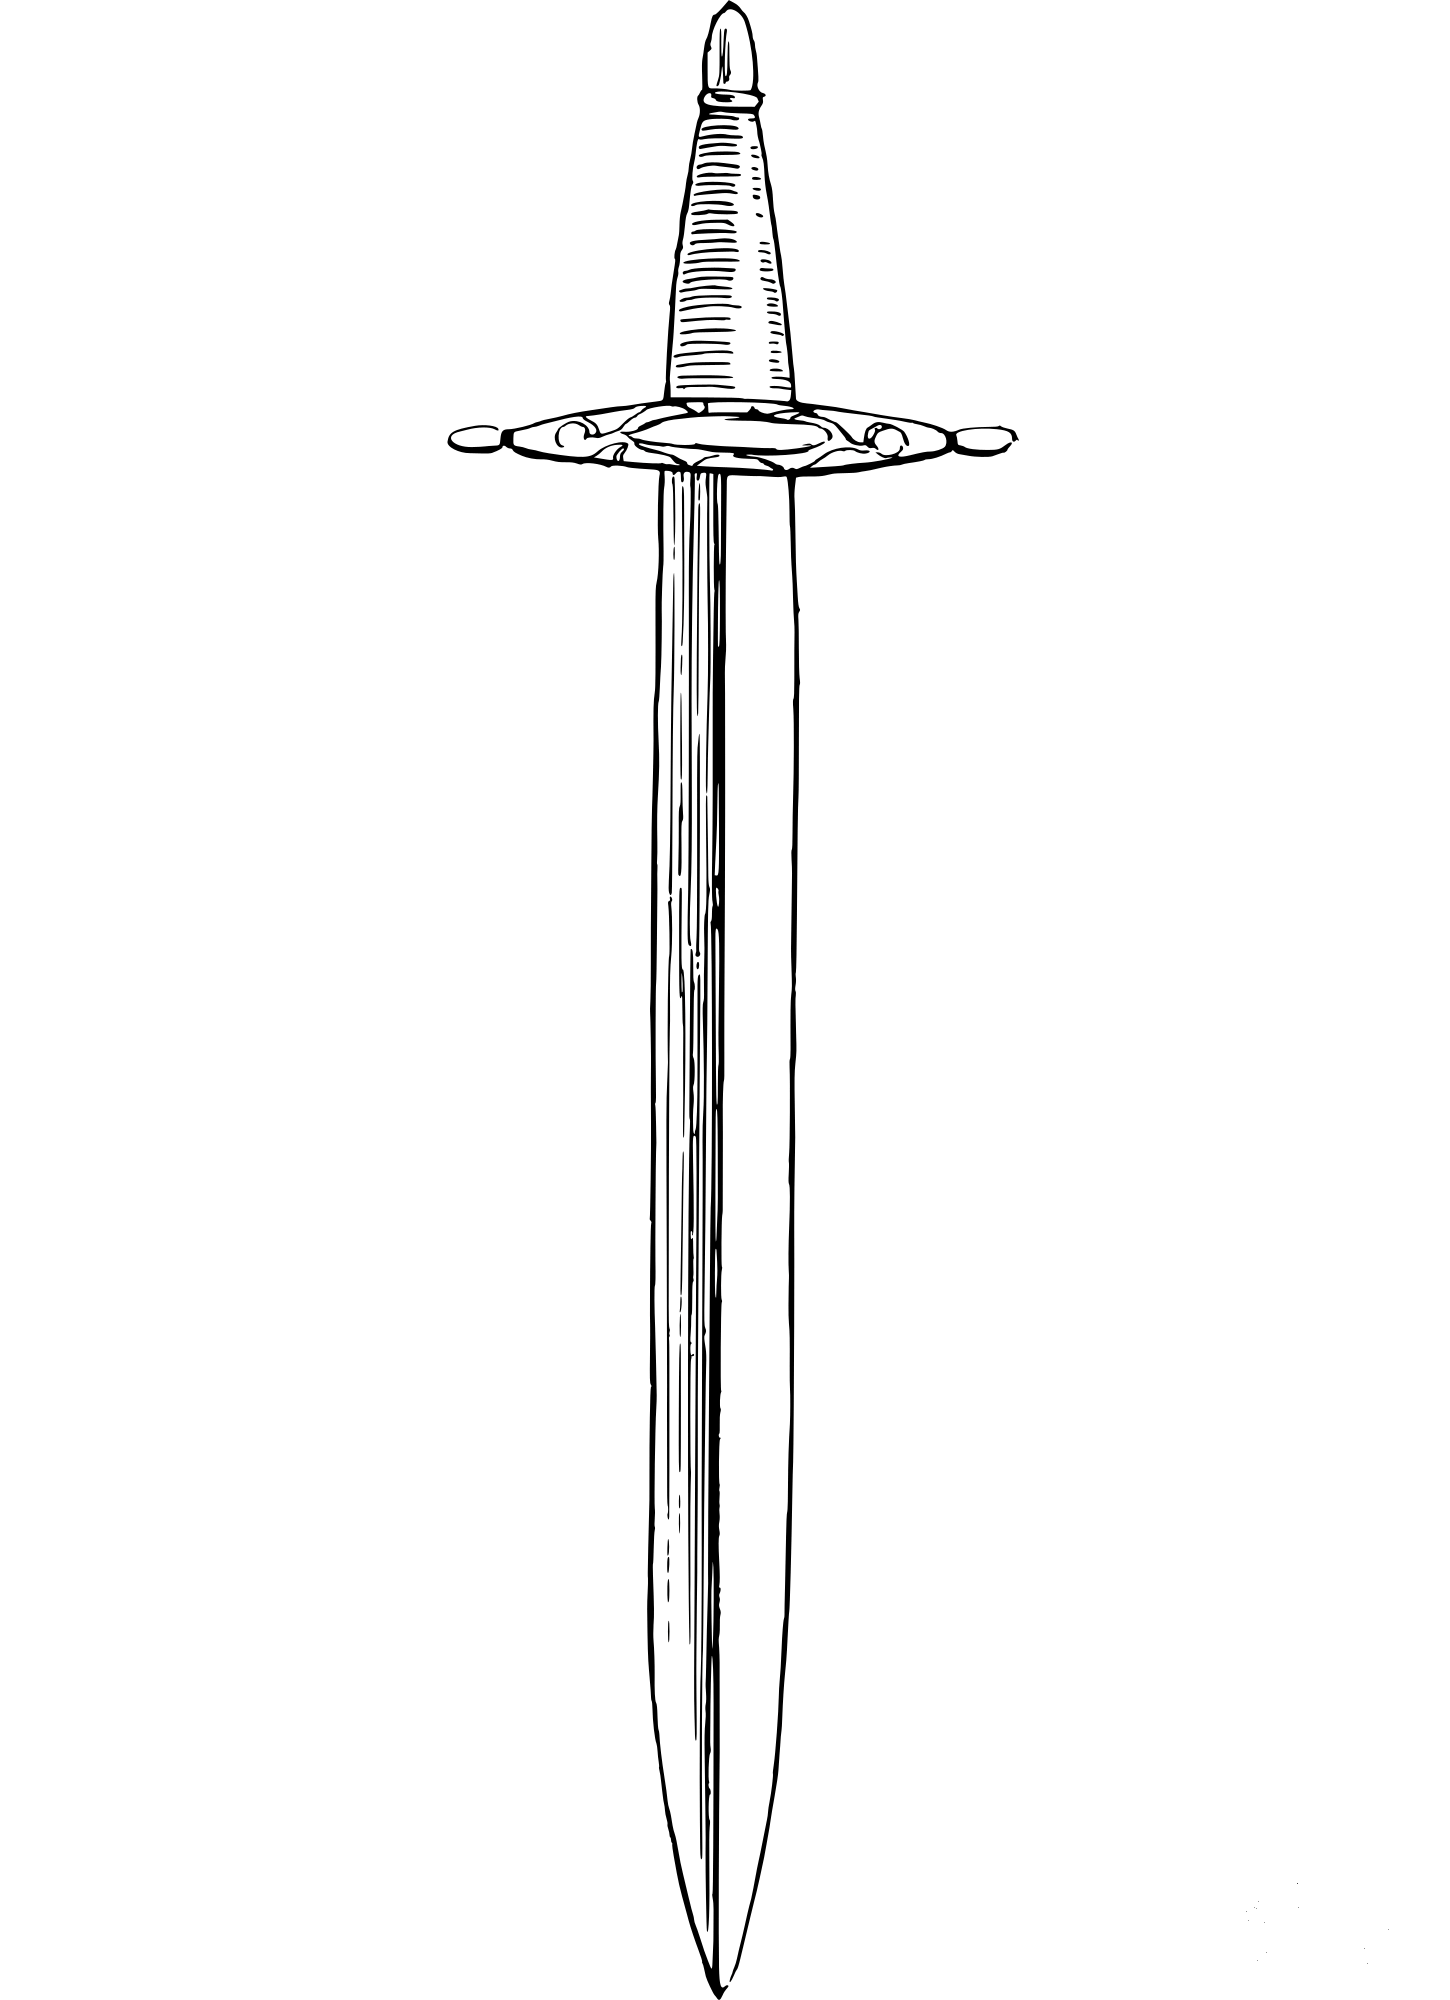 Vintage Sword coloring page - ColouringPages